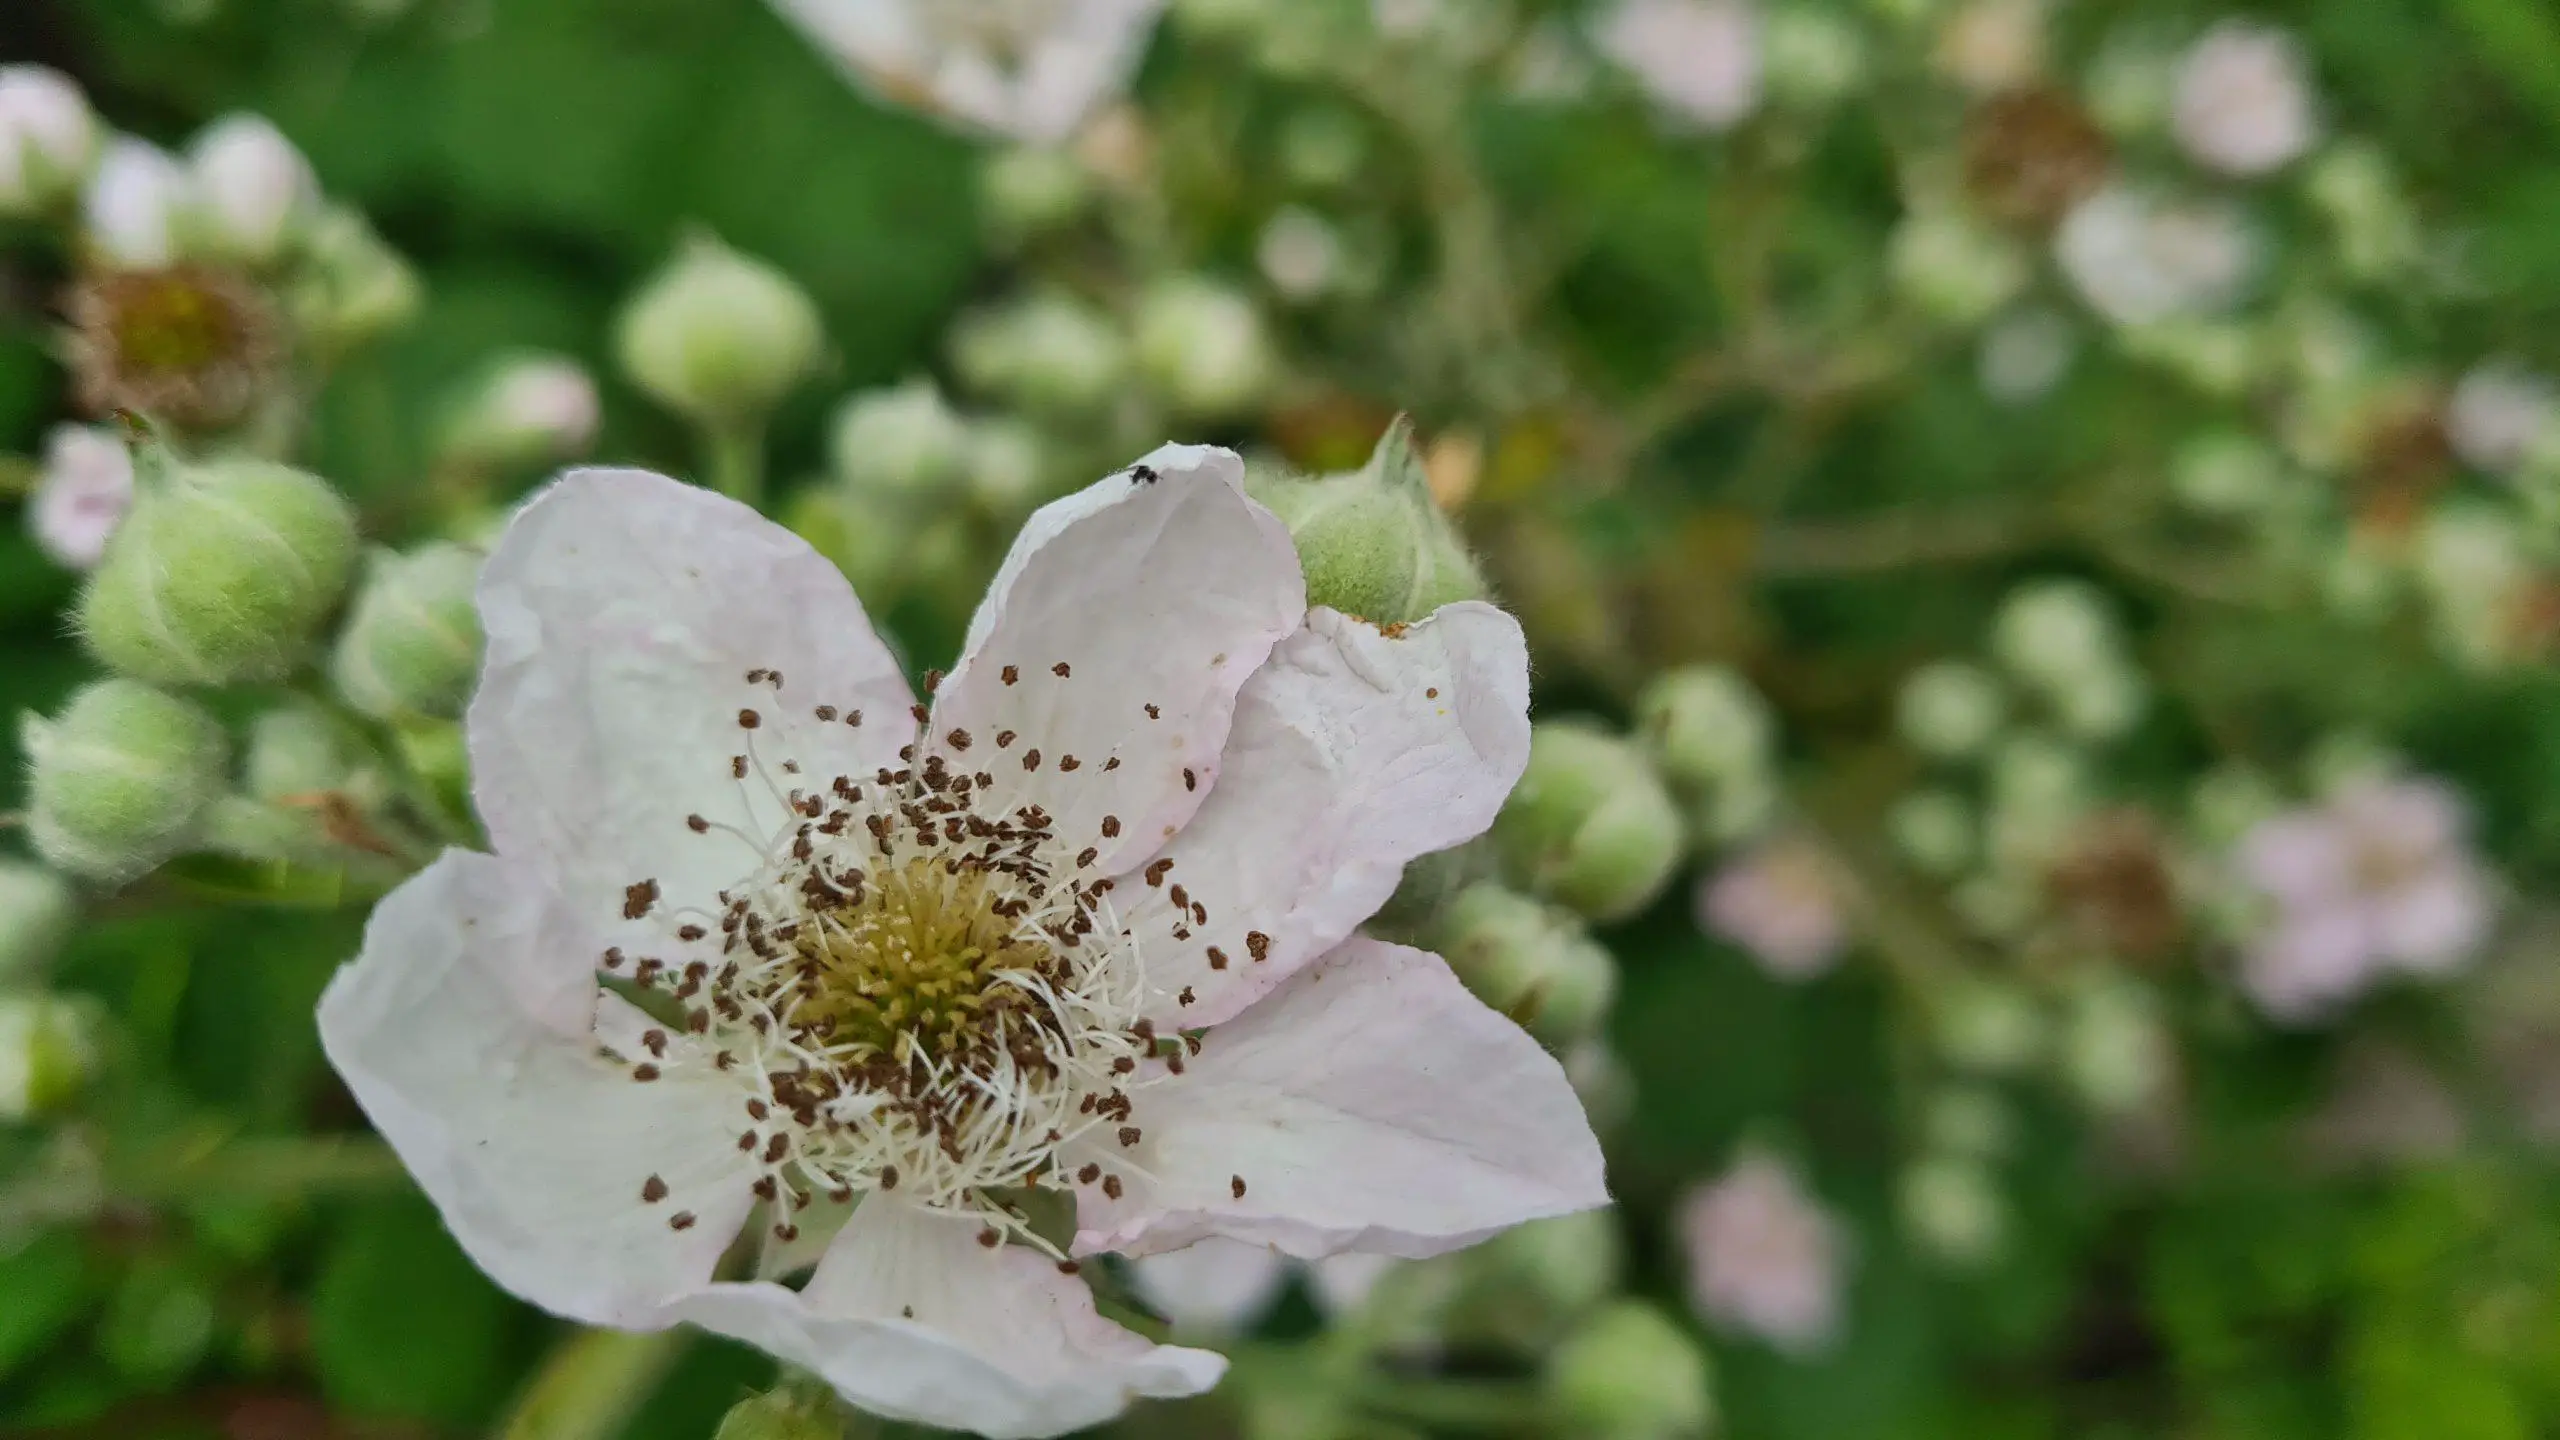 The white flower of the bramble bush ahead of spreading its seed